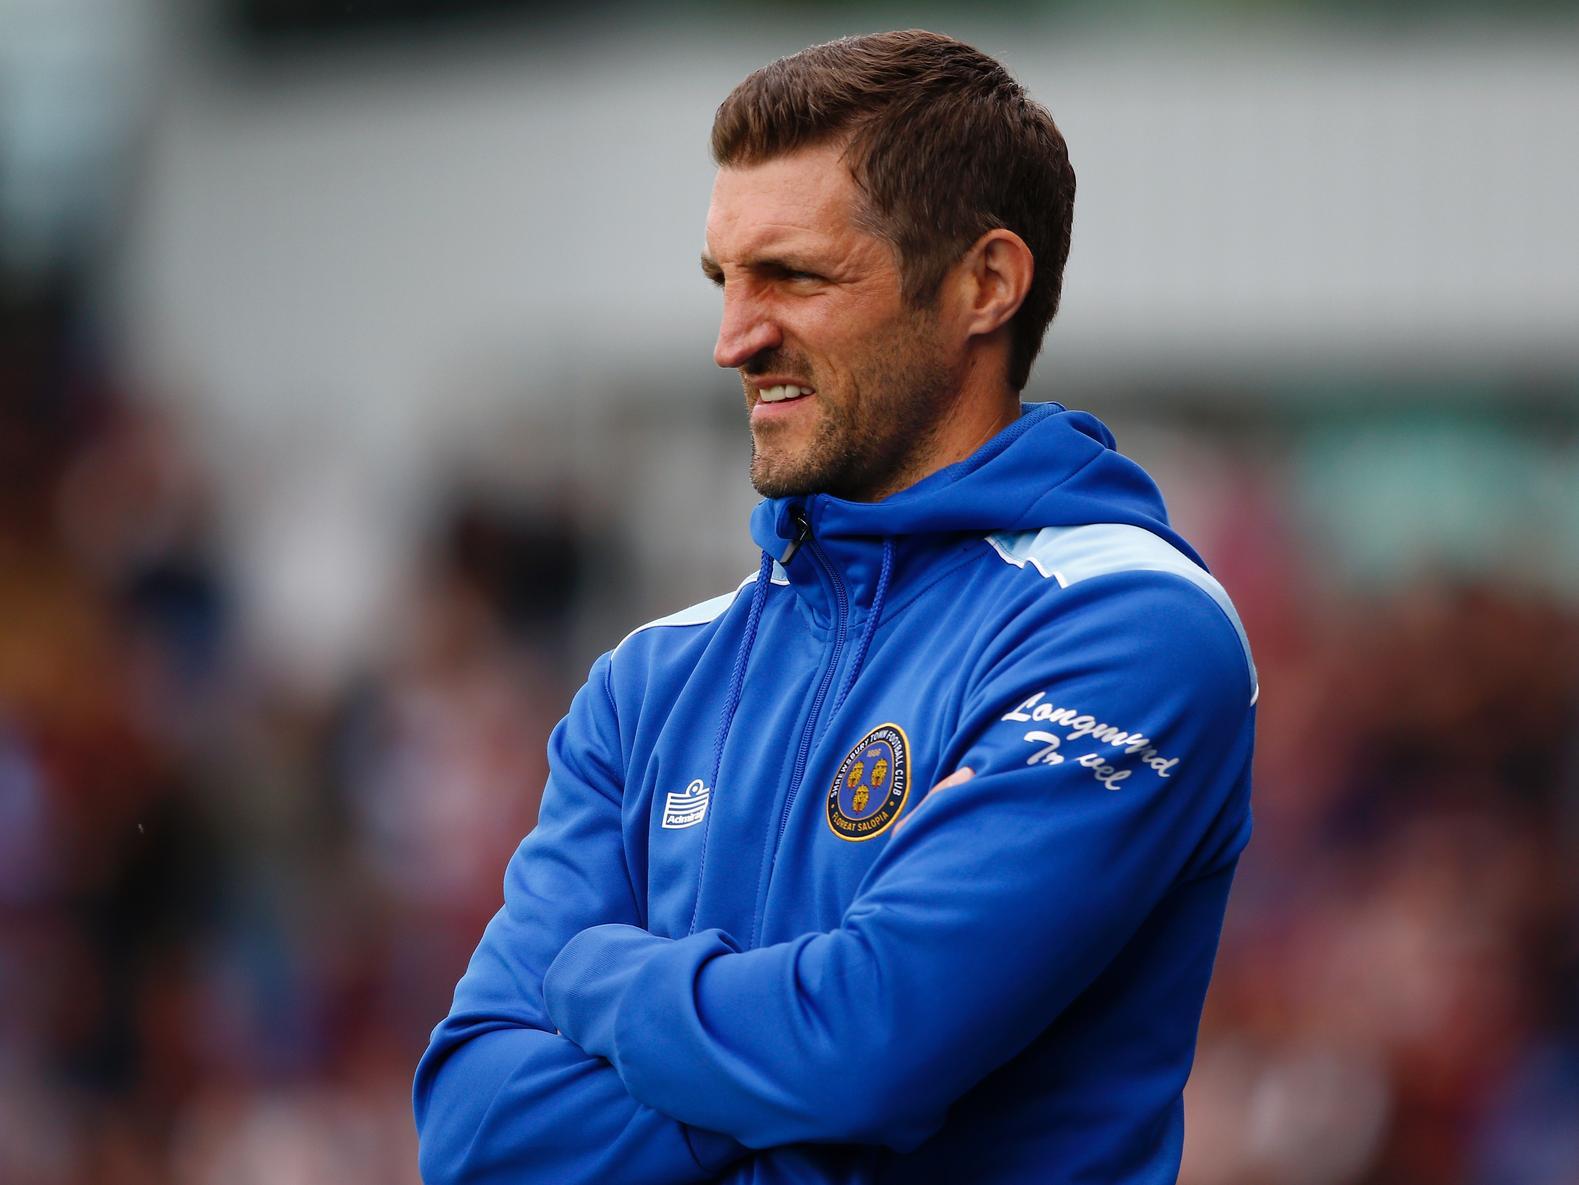 Sam Ricketts has revealed there will not be wholesale changes next month at stable Shrewsbury Town. (Shropshire Star)